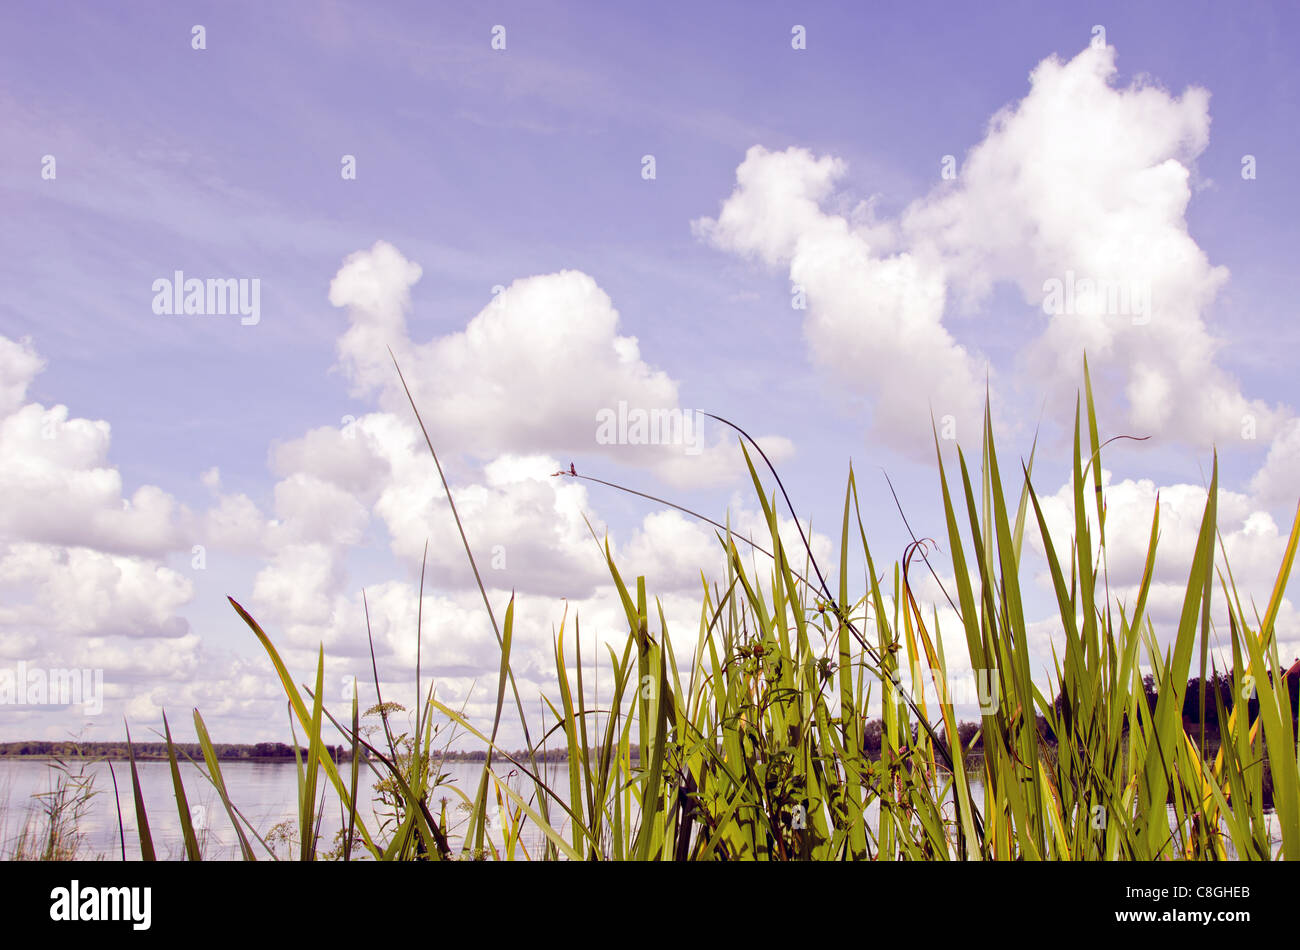 Glimpse of the lake and cloudy sky over the lake shore plants. Stock Photo